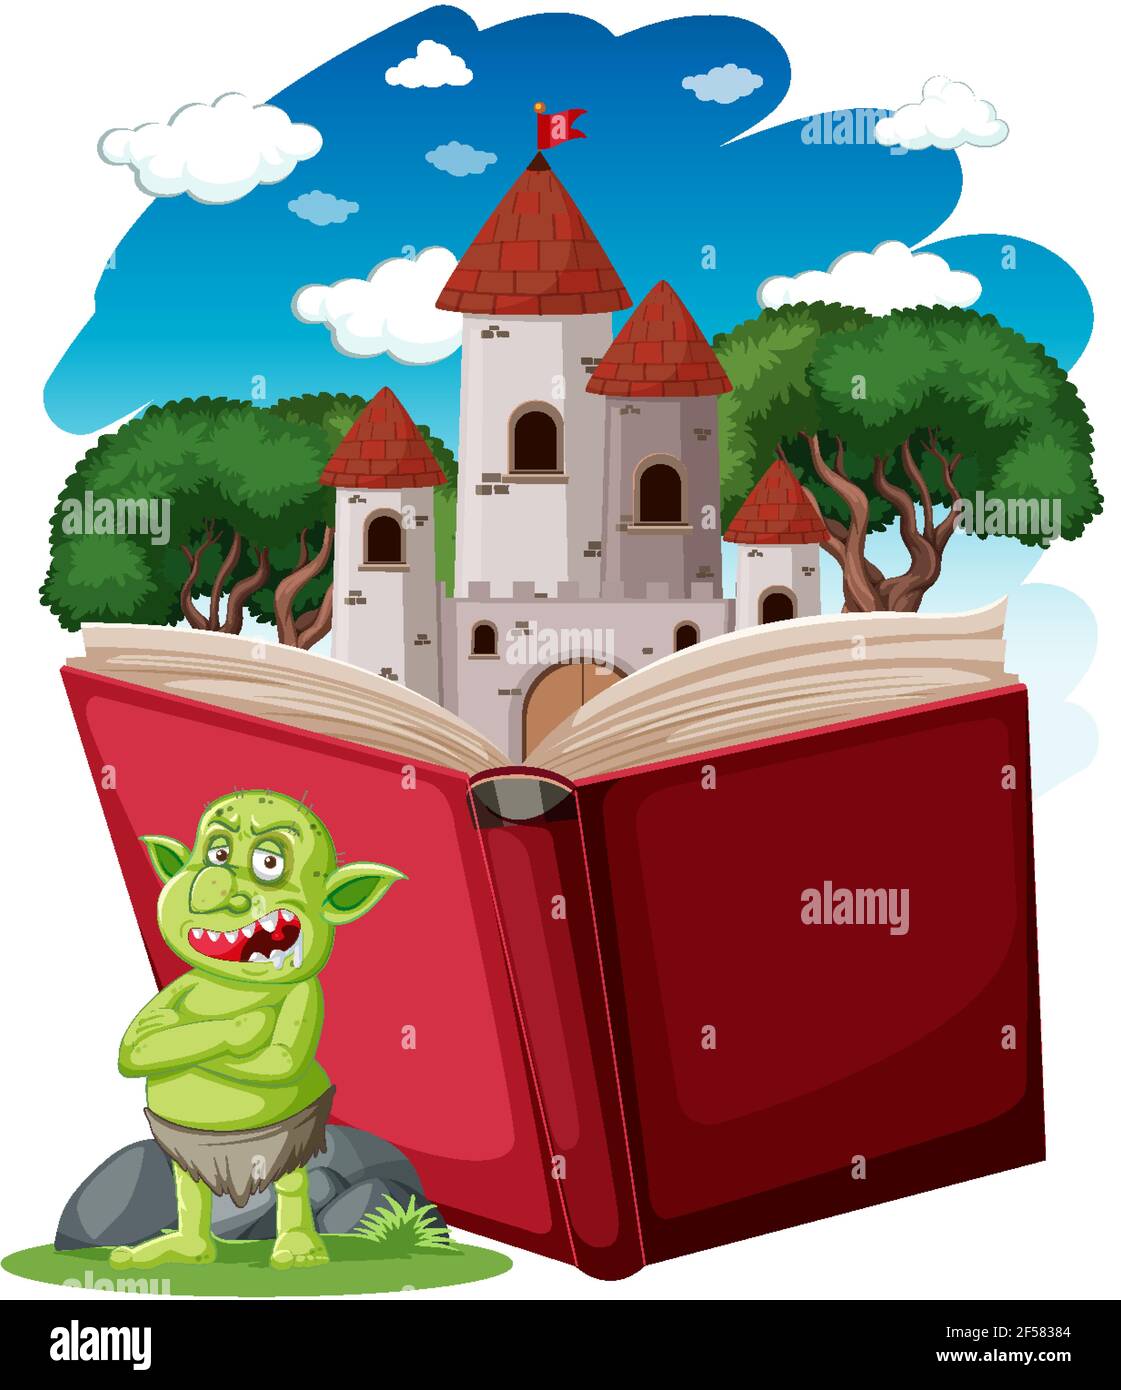 Goblin or troll cartoon character with a story book illustration Stock Vector